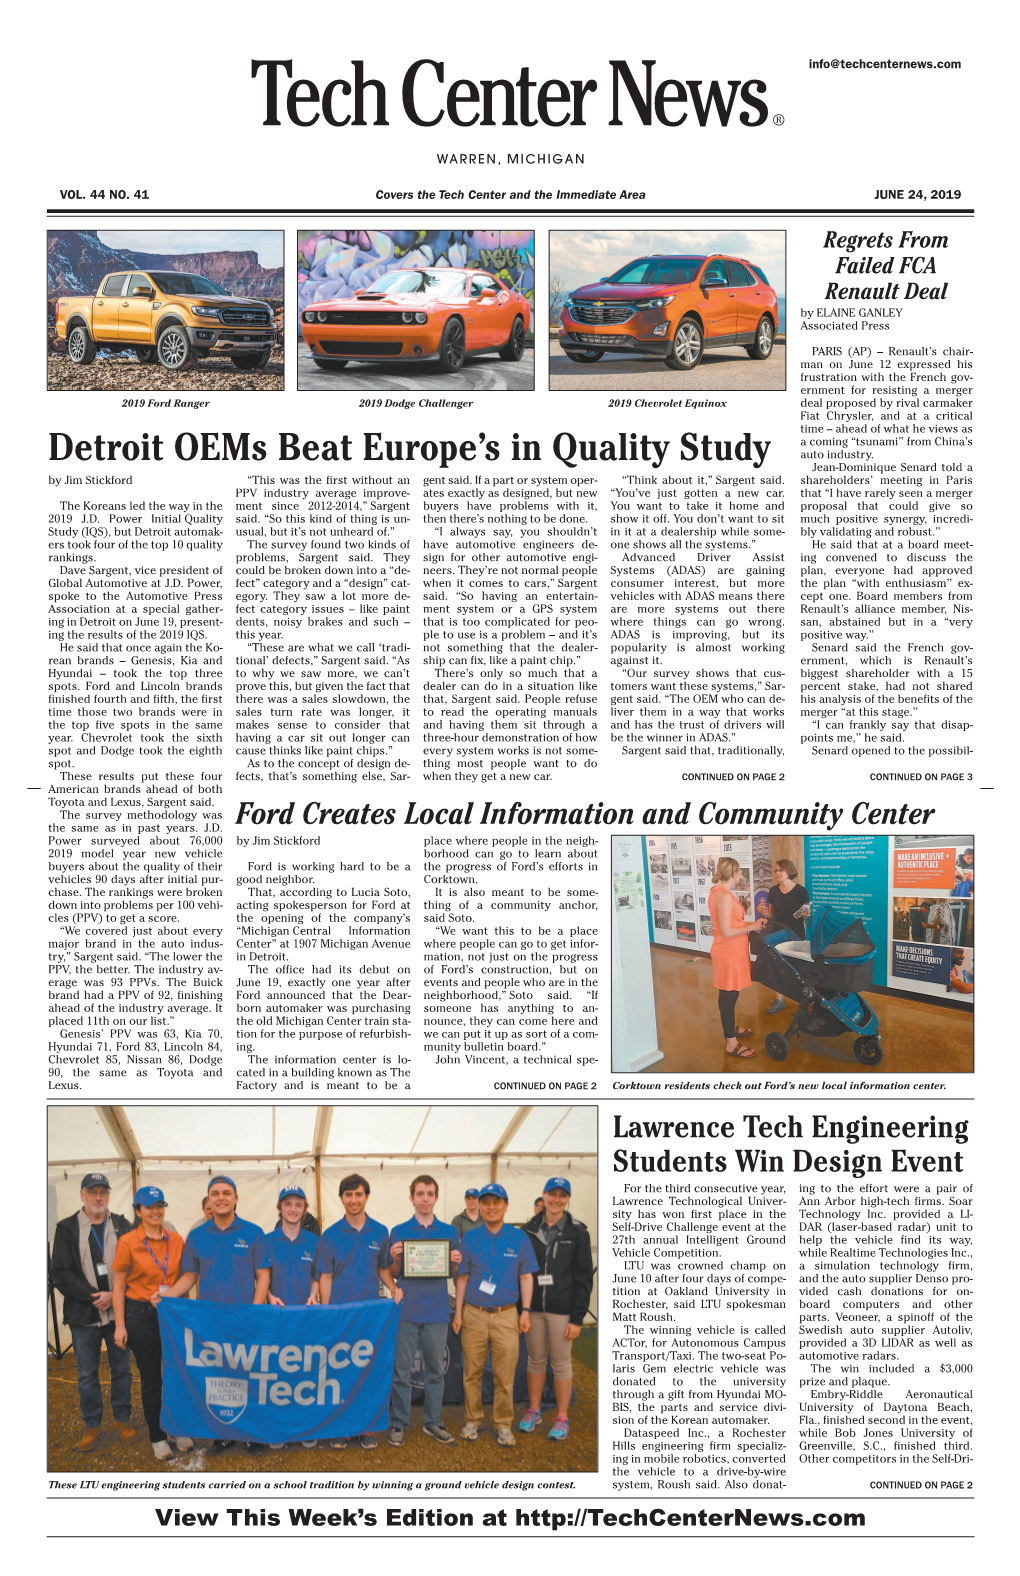 Detroit Oems Beat Europe's in Quality Study